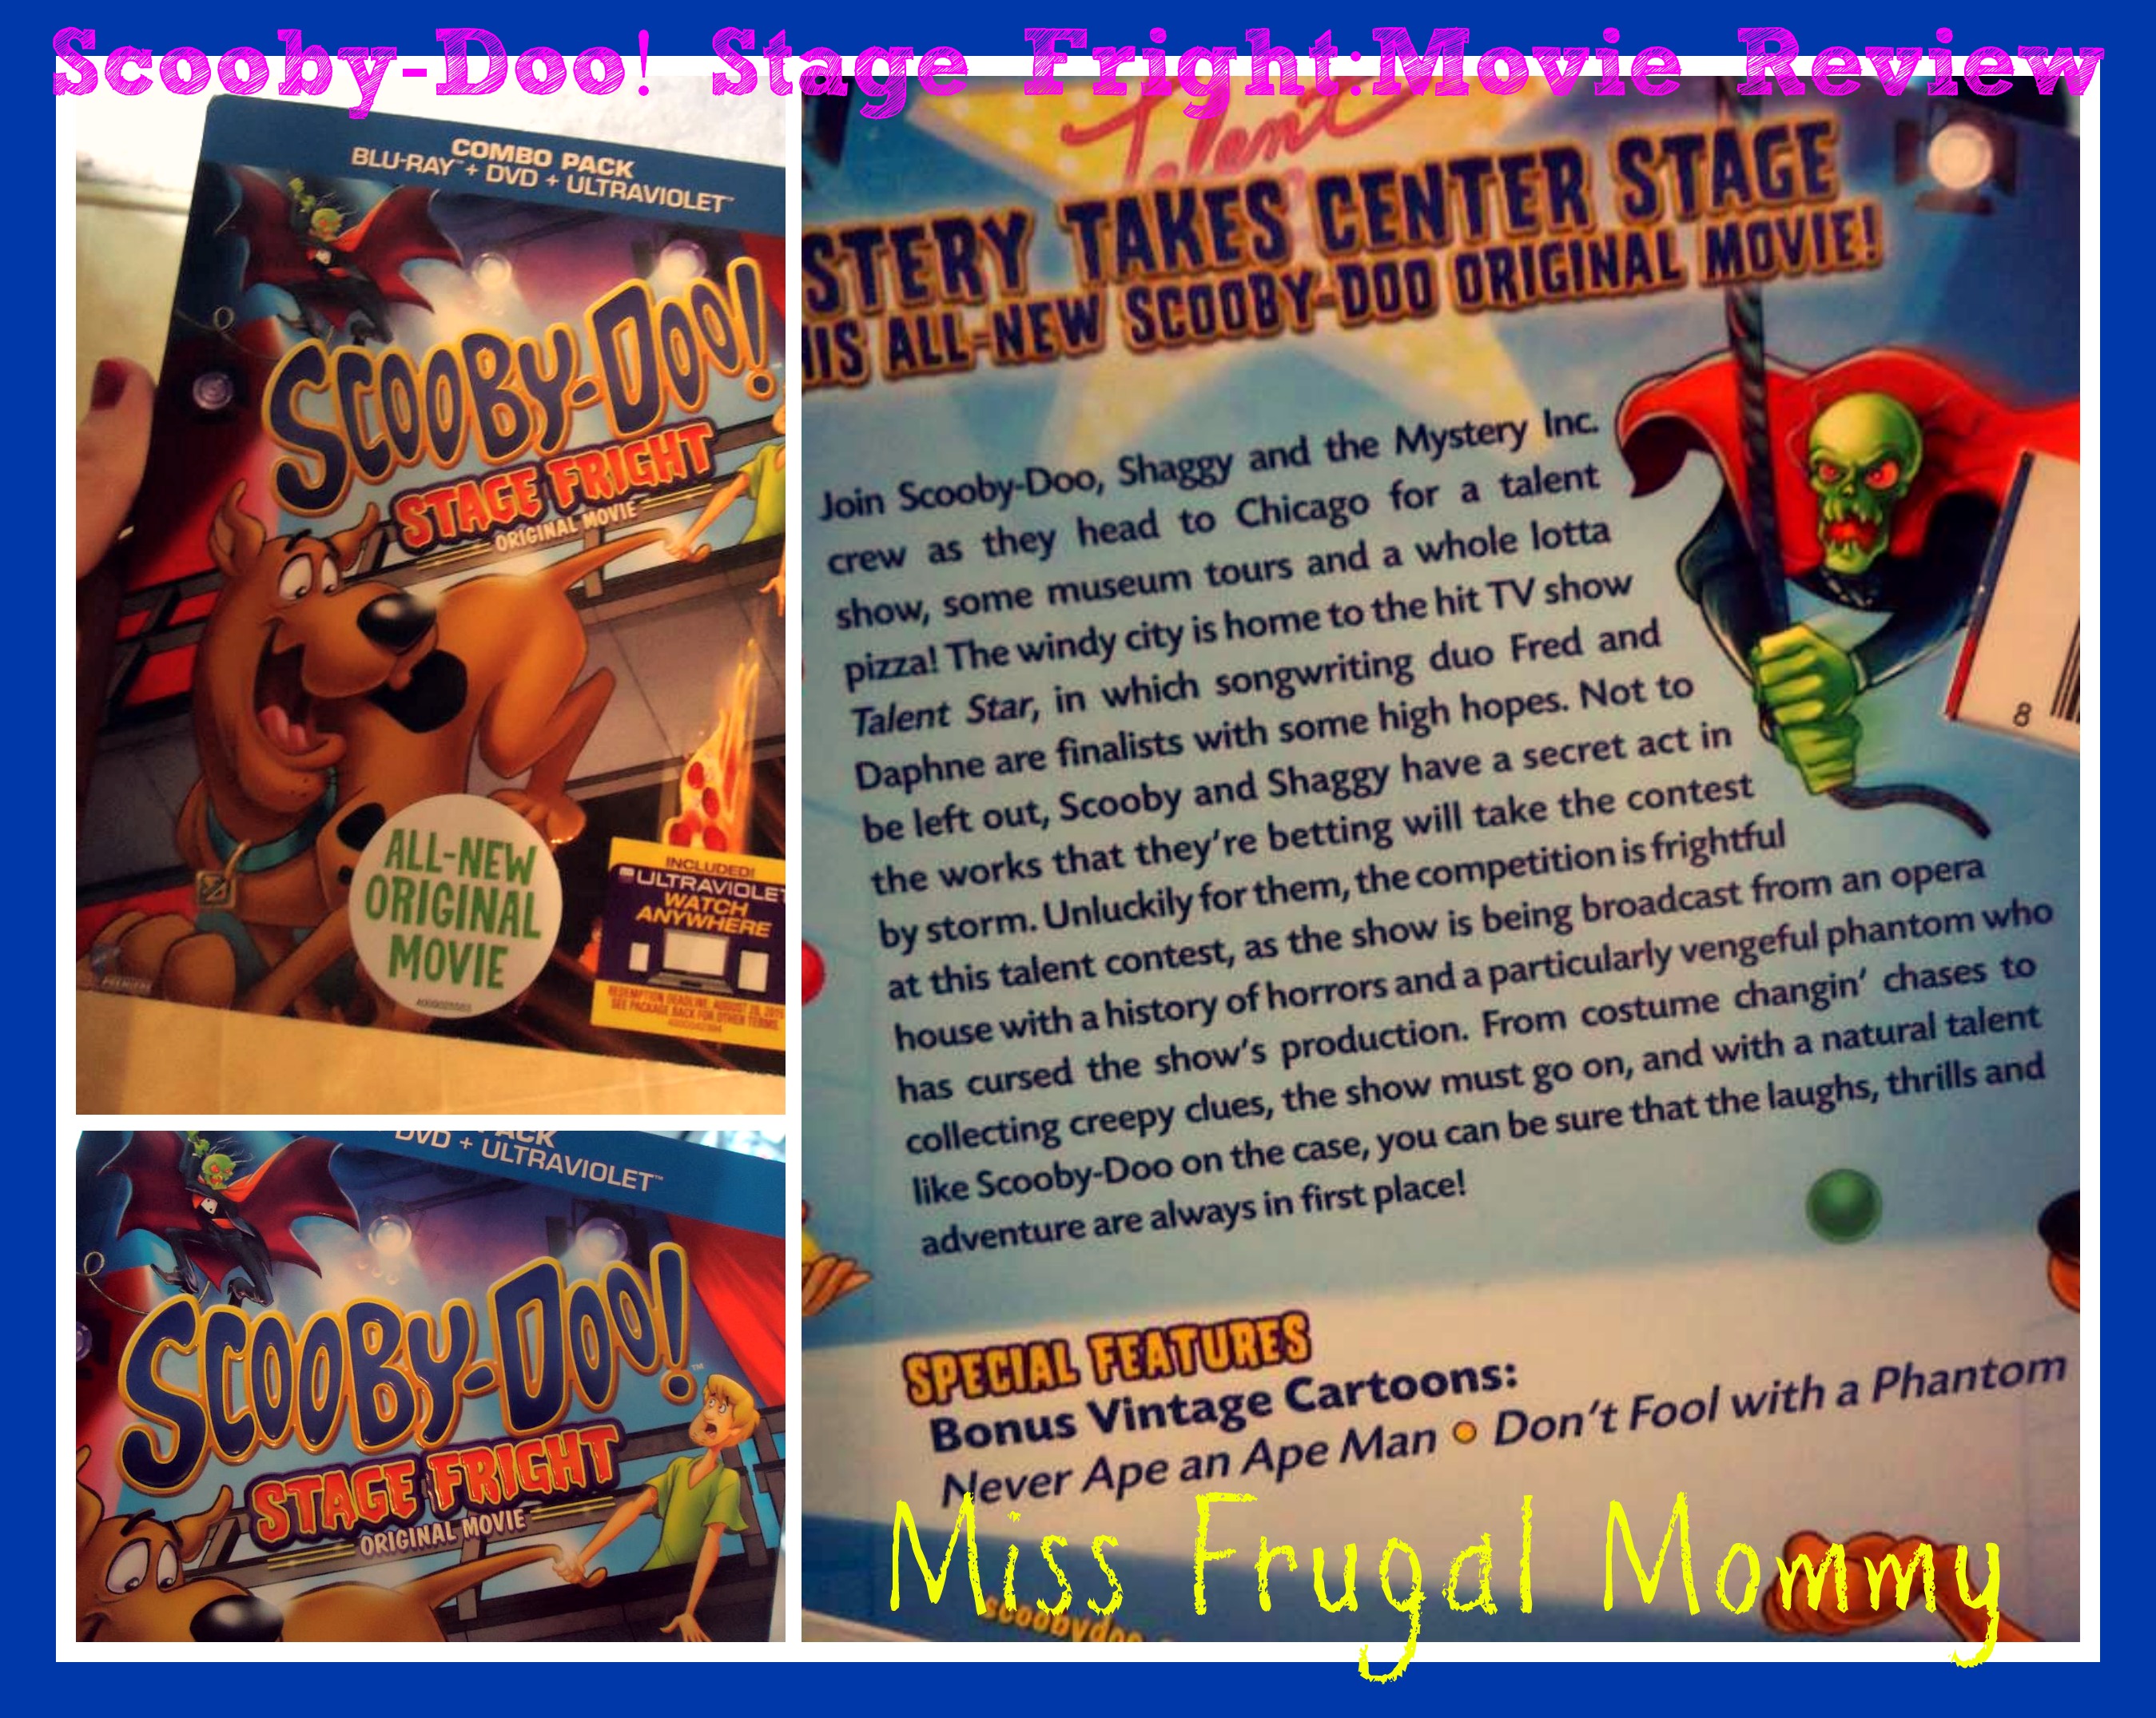 Scooby-Doo! Stage Fright: Movie Review